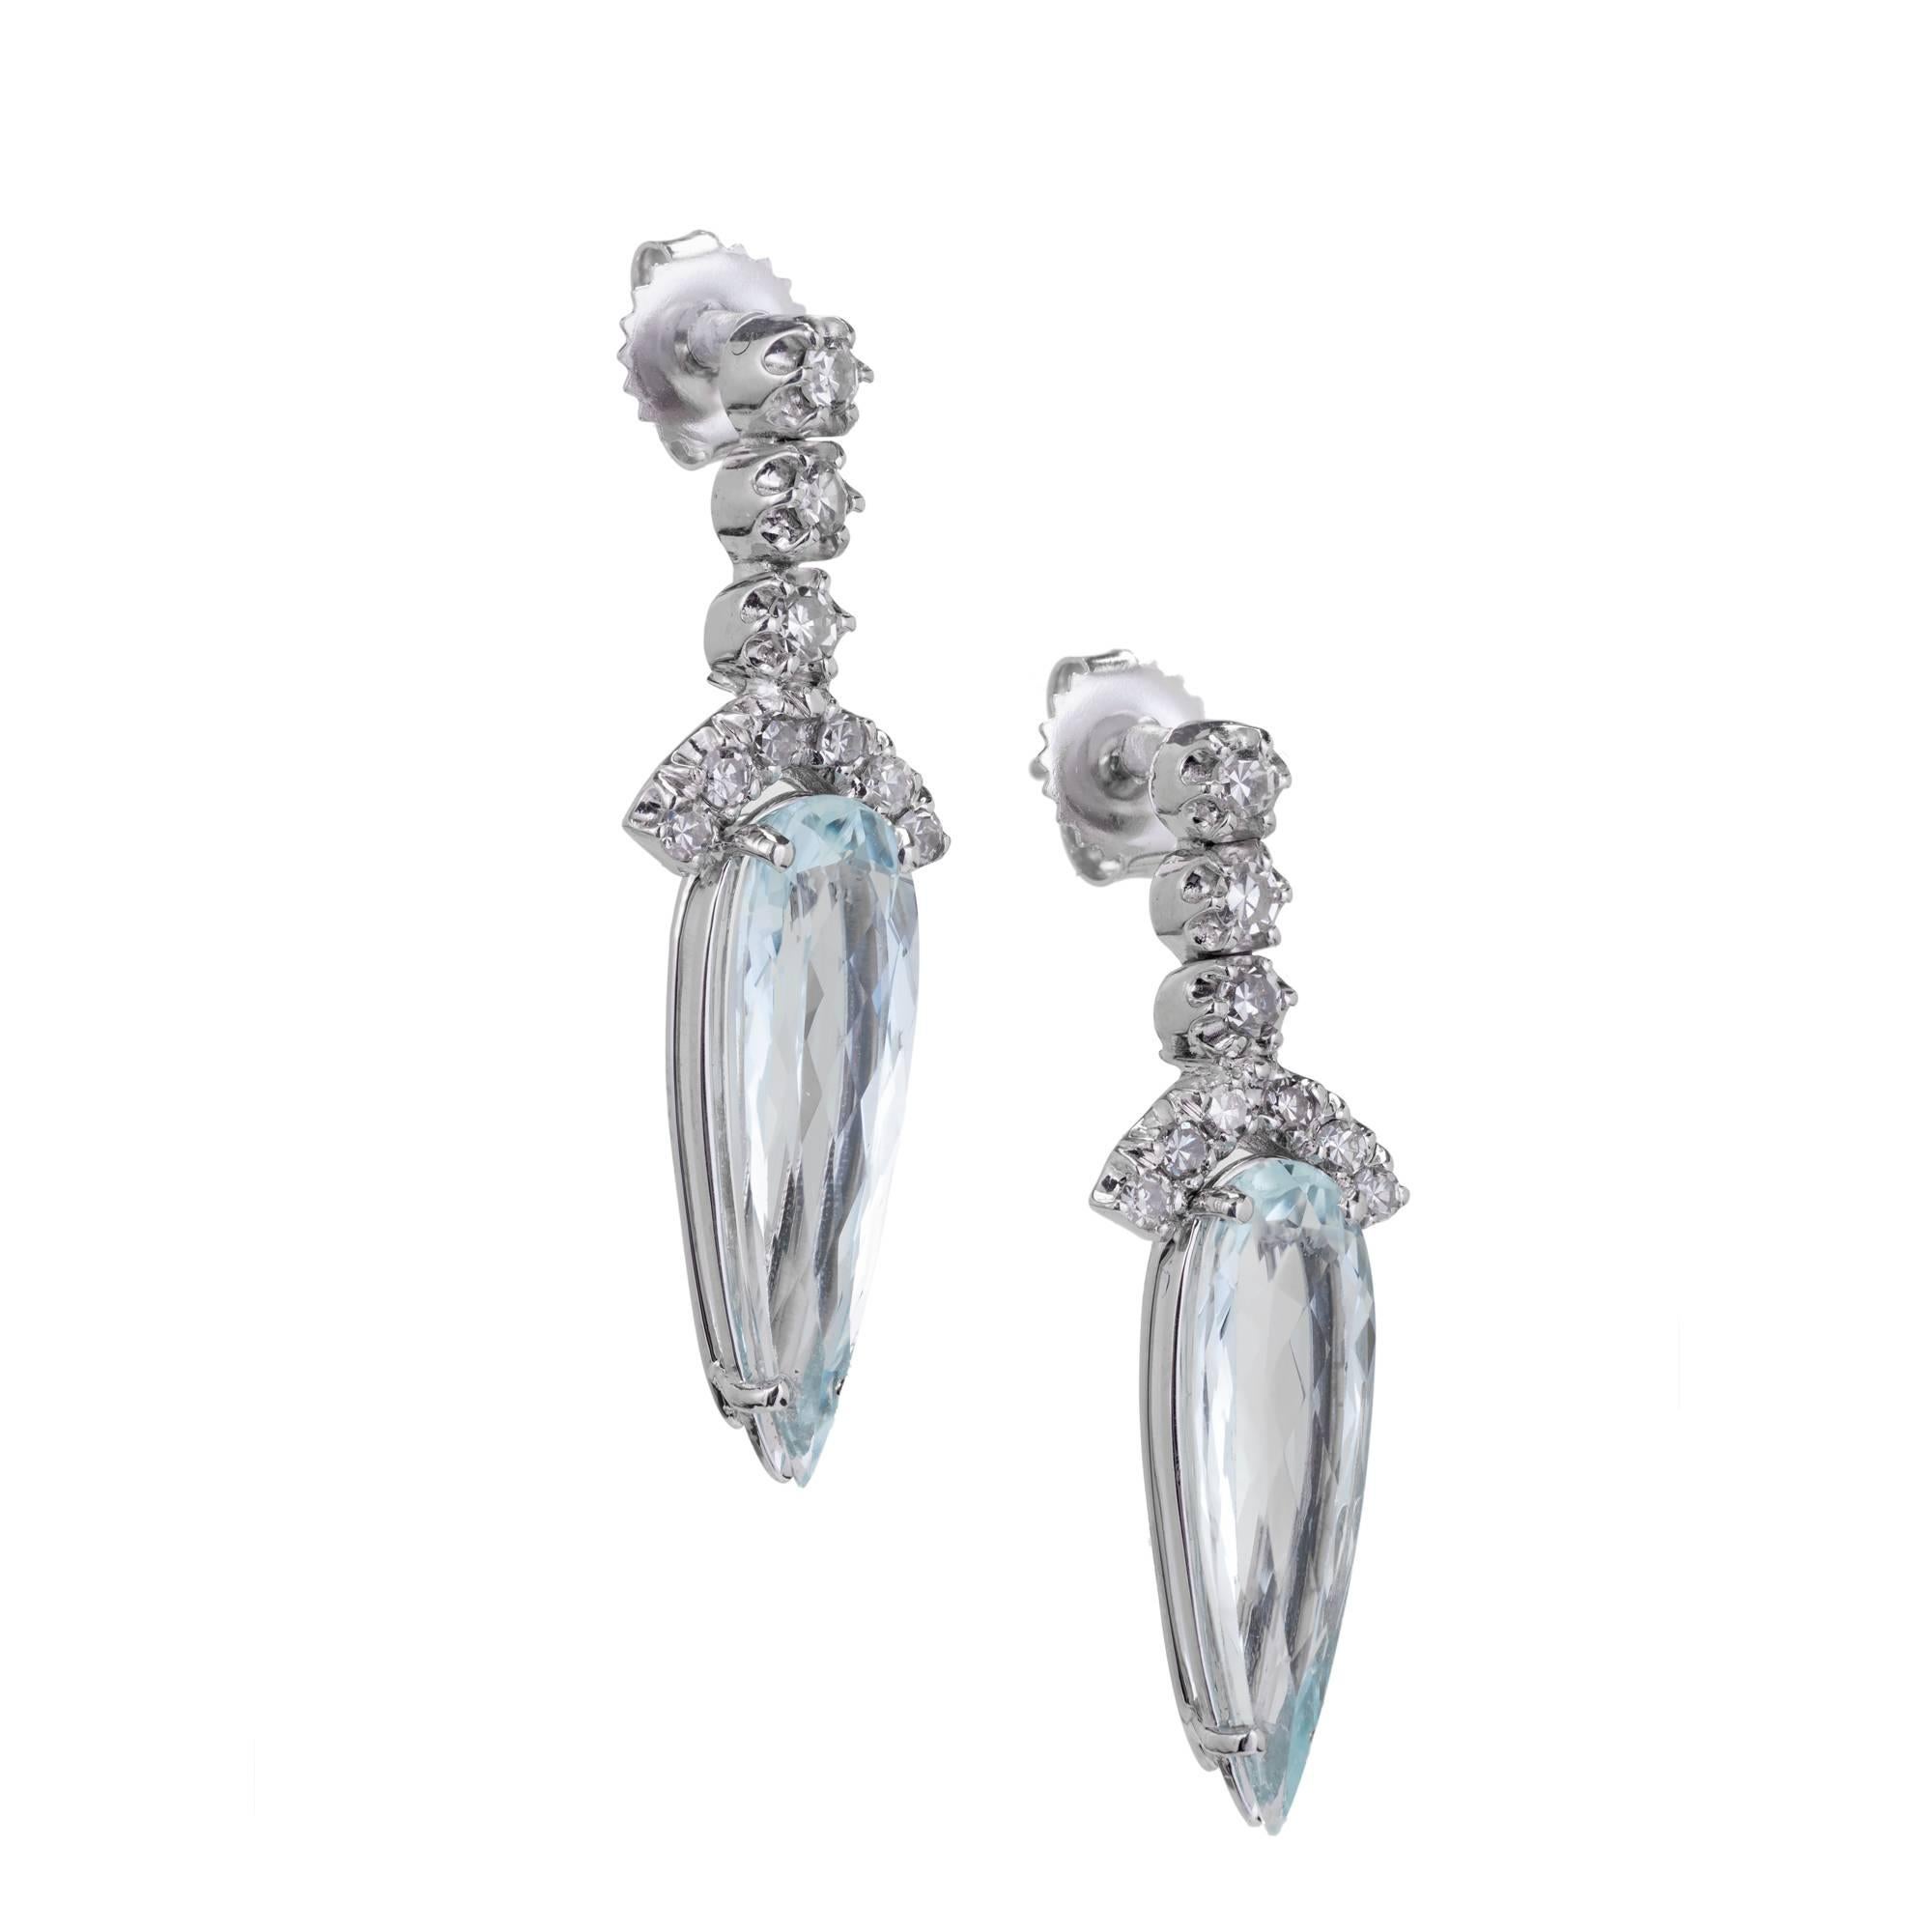 Vintage 1940s dangle earrings in 14k white gold with bright white Diamonds and natural untreated pear shaped Aquamarines.

2 pear light blue Aquamarines, approx. total weight 10.00cts
18 single cut Diamonds, approx. total weight .68cts, H, VS
14k